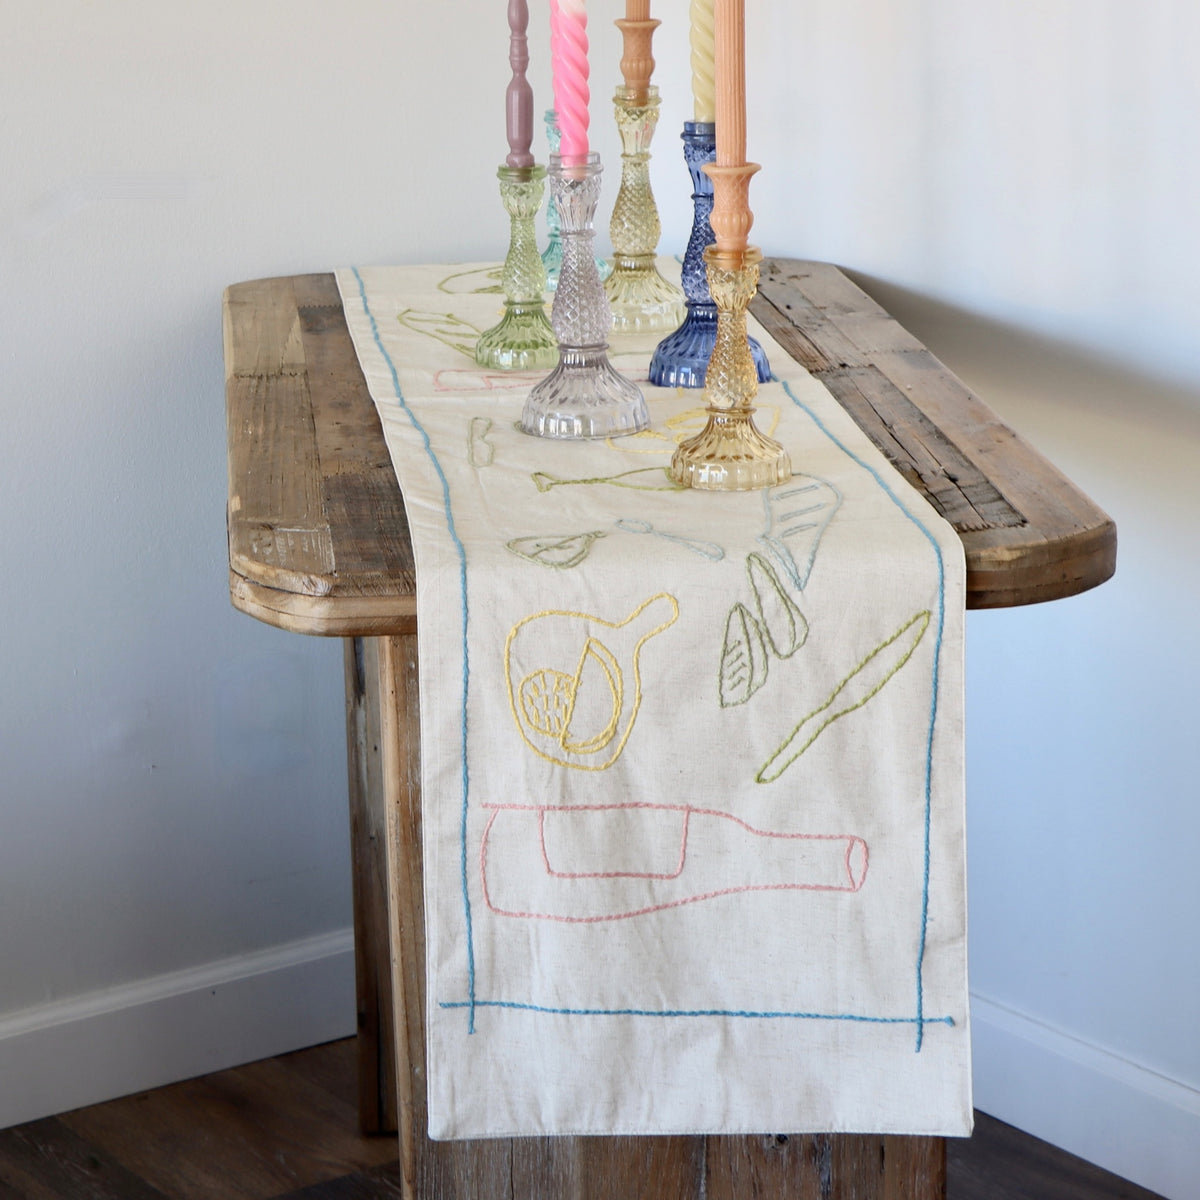 A Picnic with Friends Woven Linen Embroidered Table Runner - Holistic Habitat 